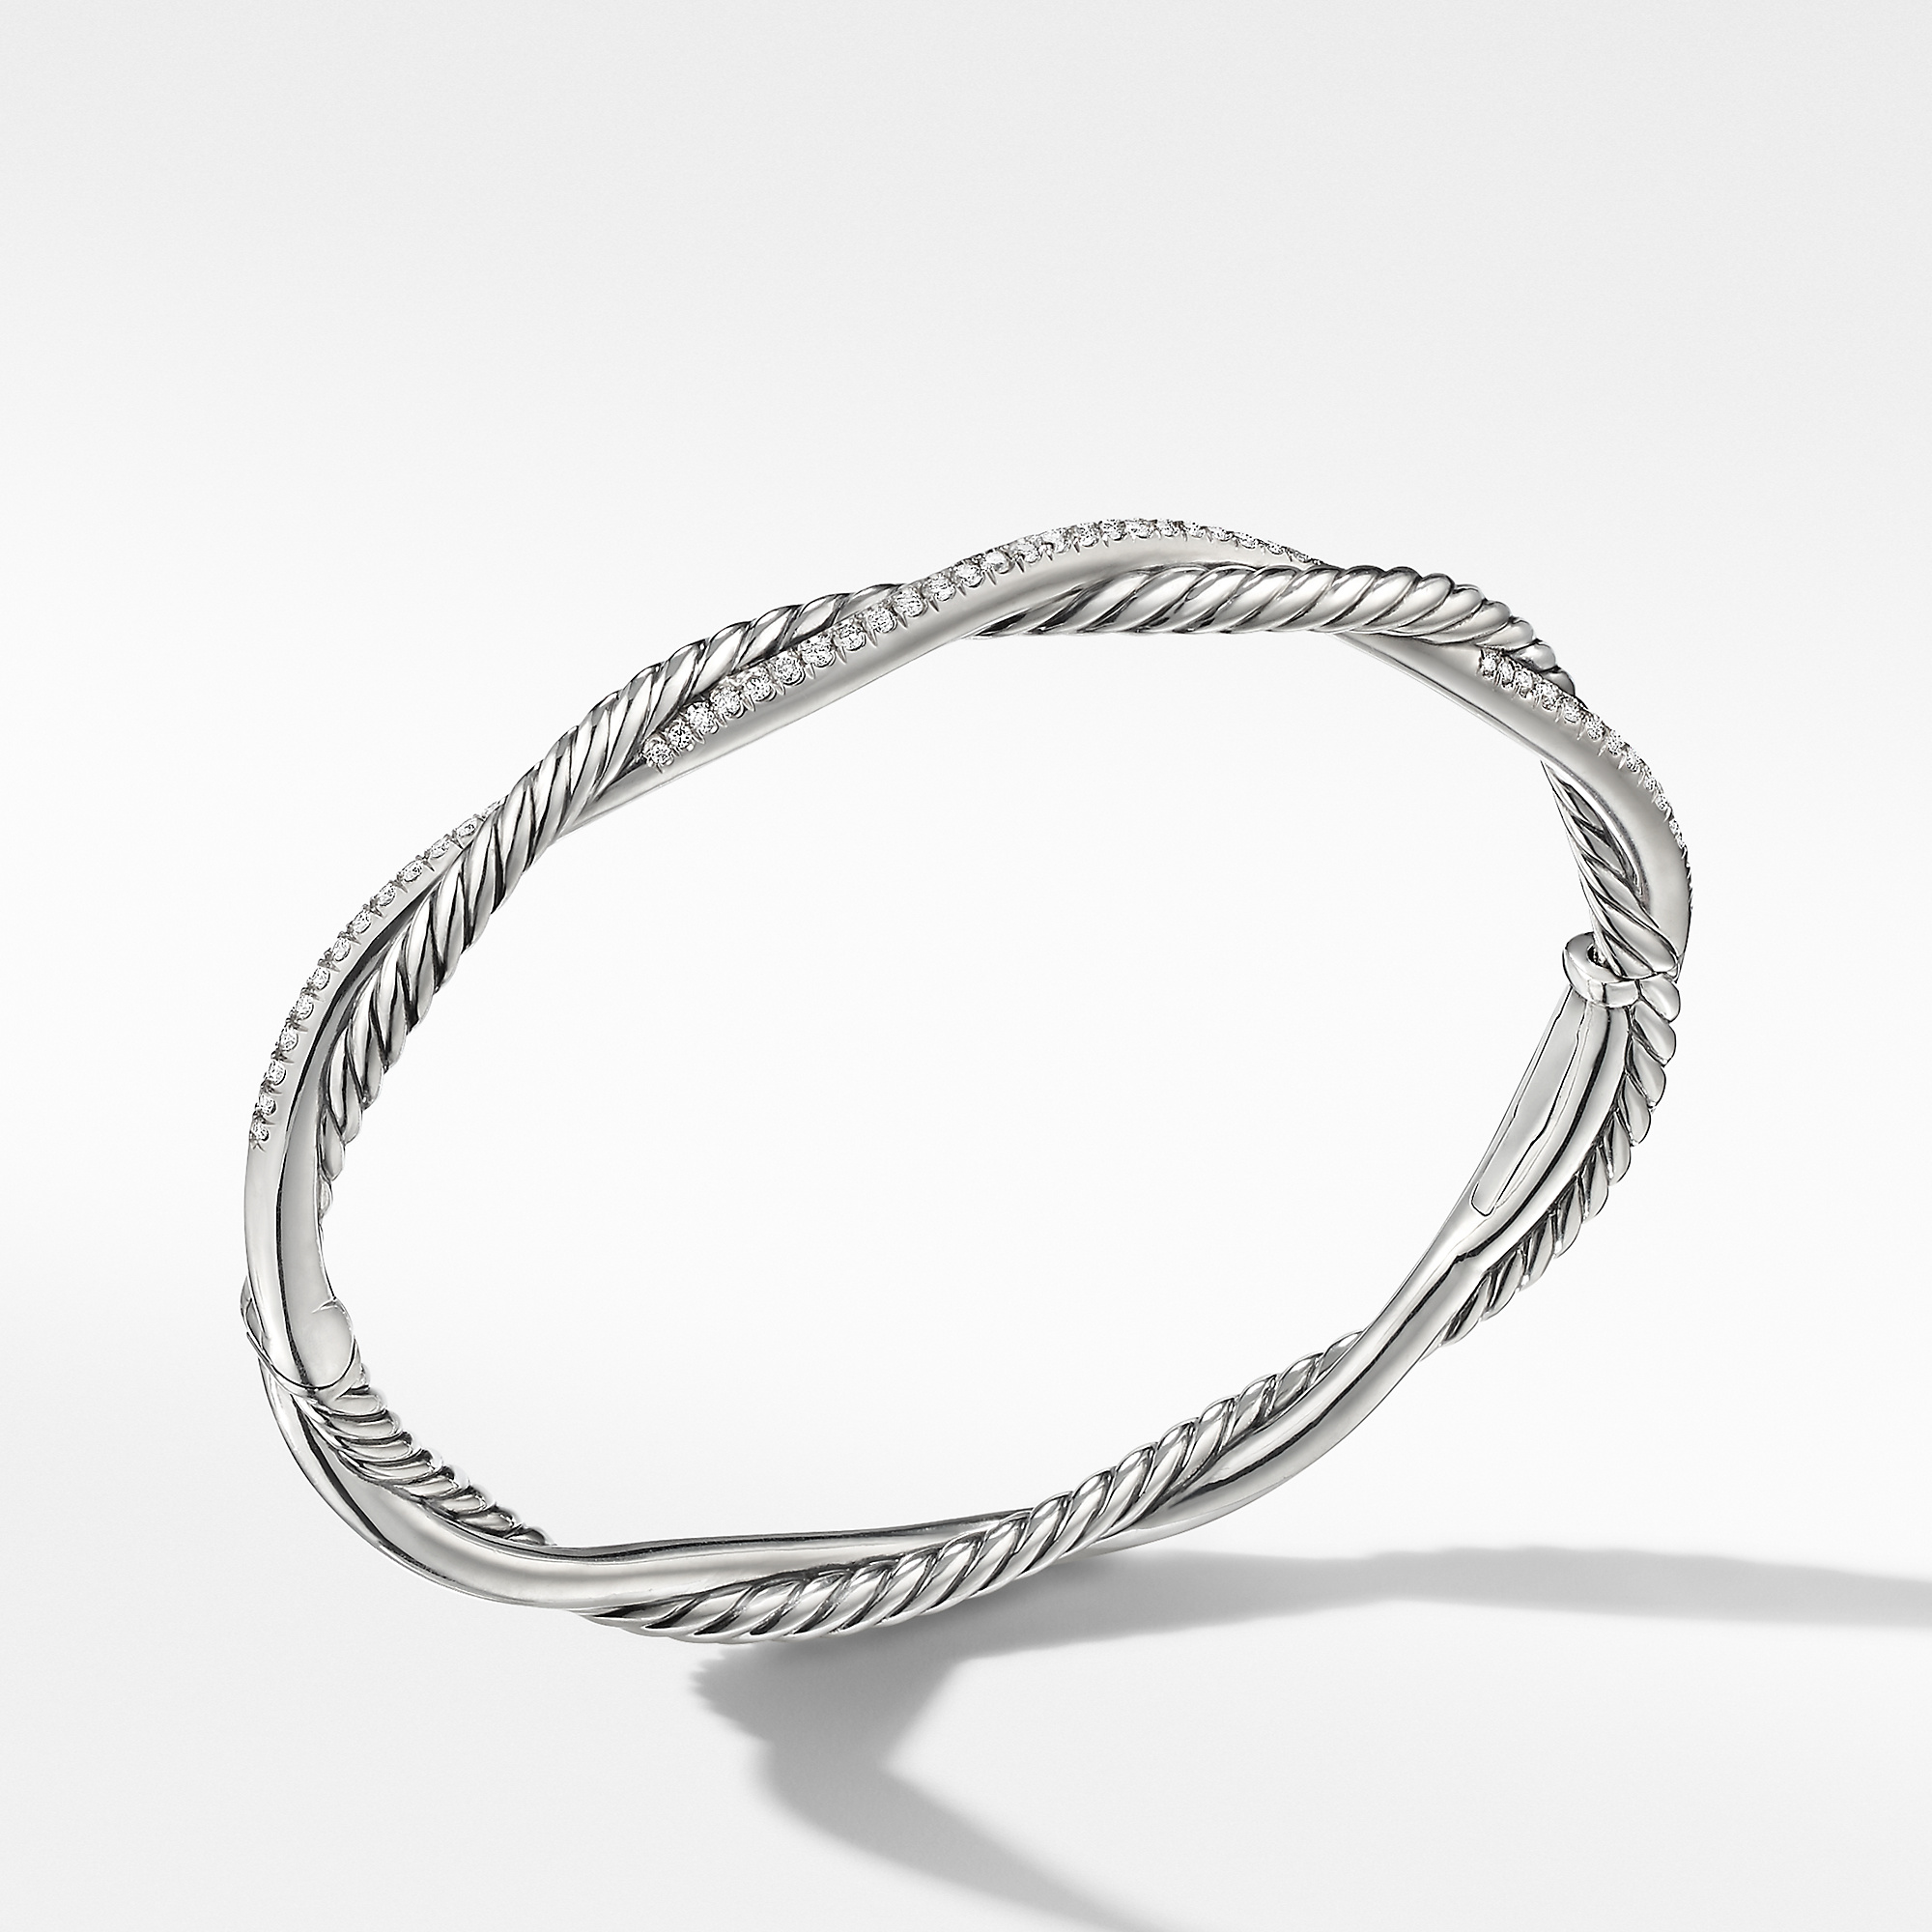 Petite Infinity Bracelet in Sterling Silver with Pave Diamonds